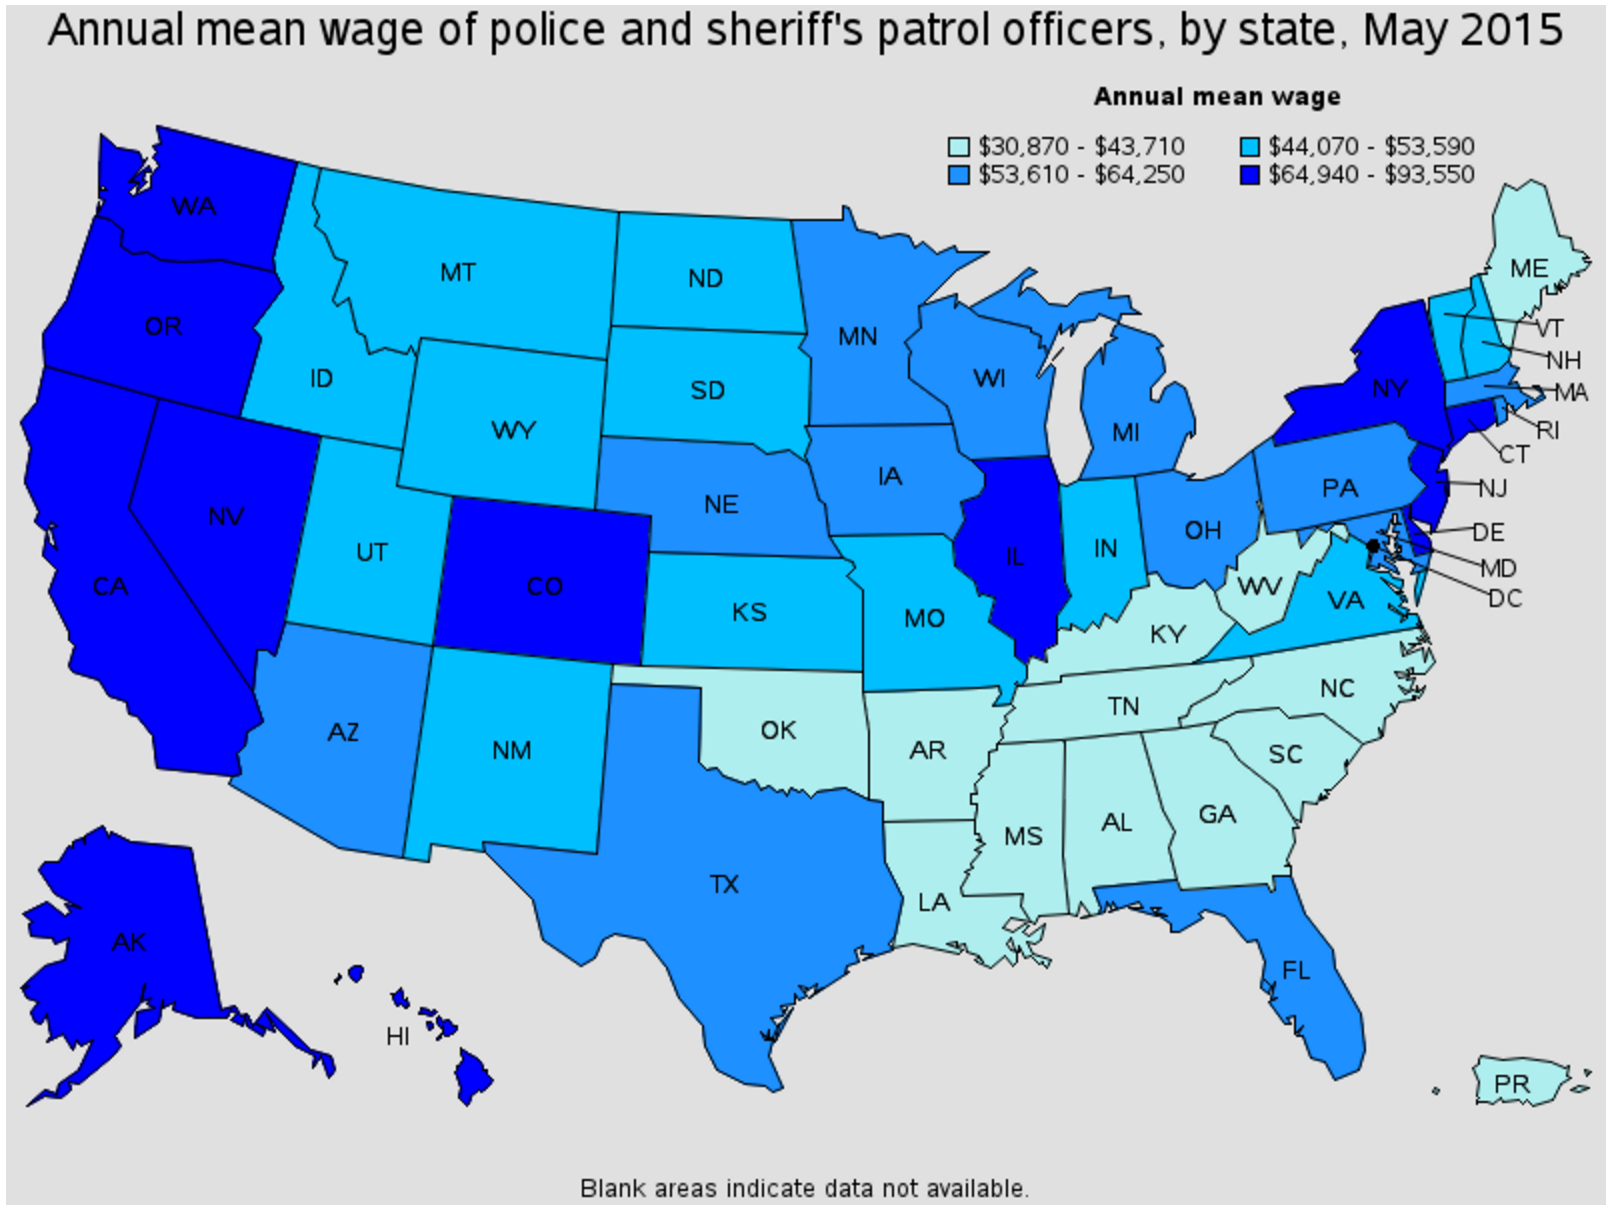 Aplington police officer average salary by state